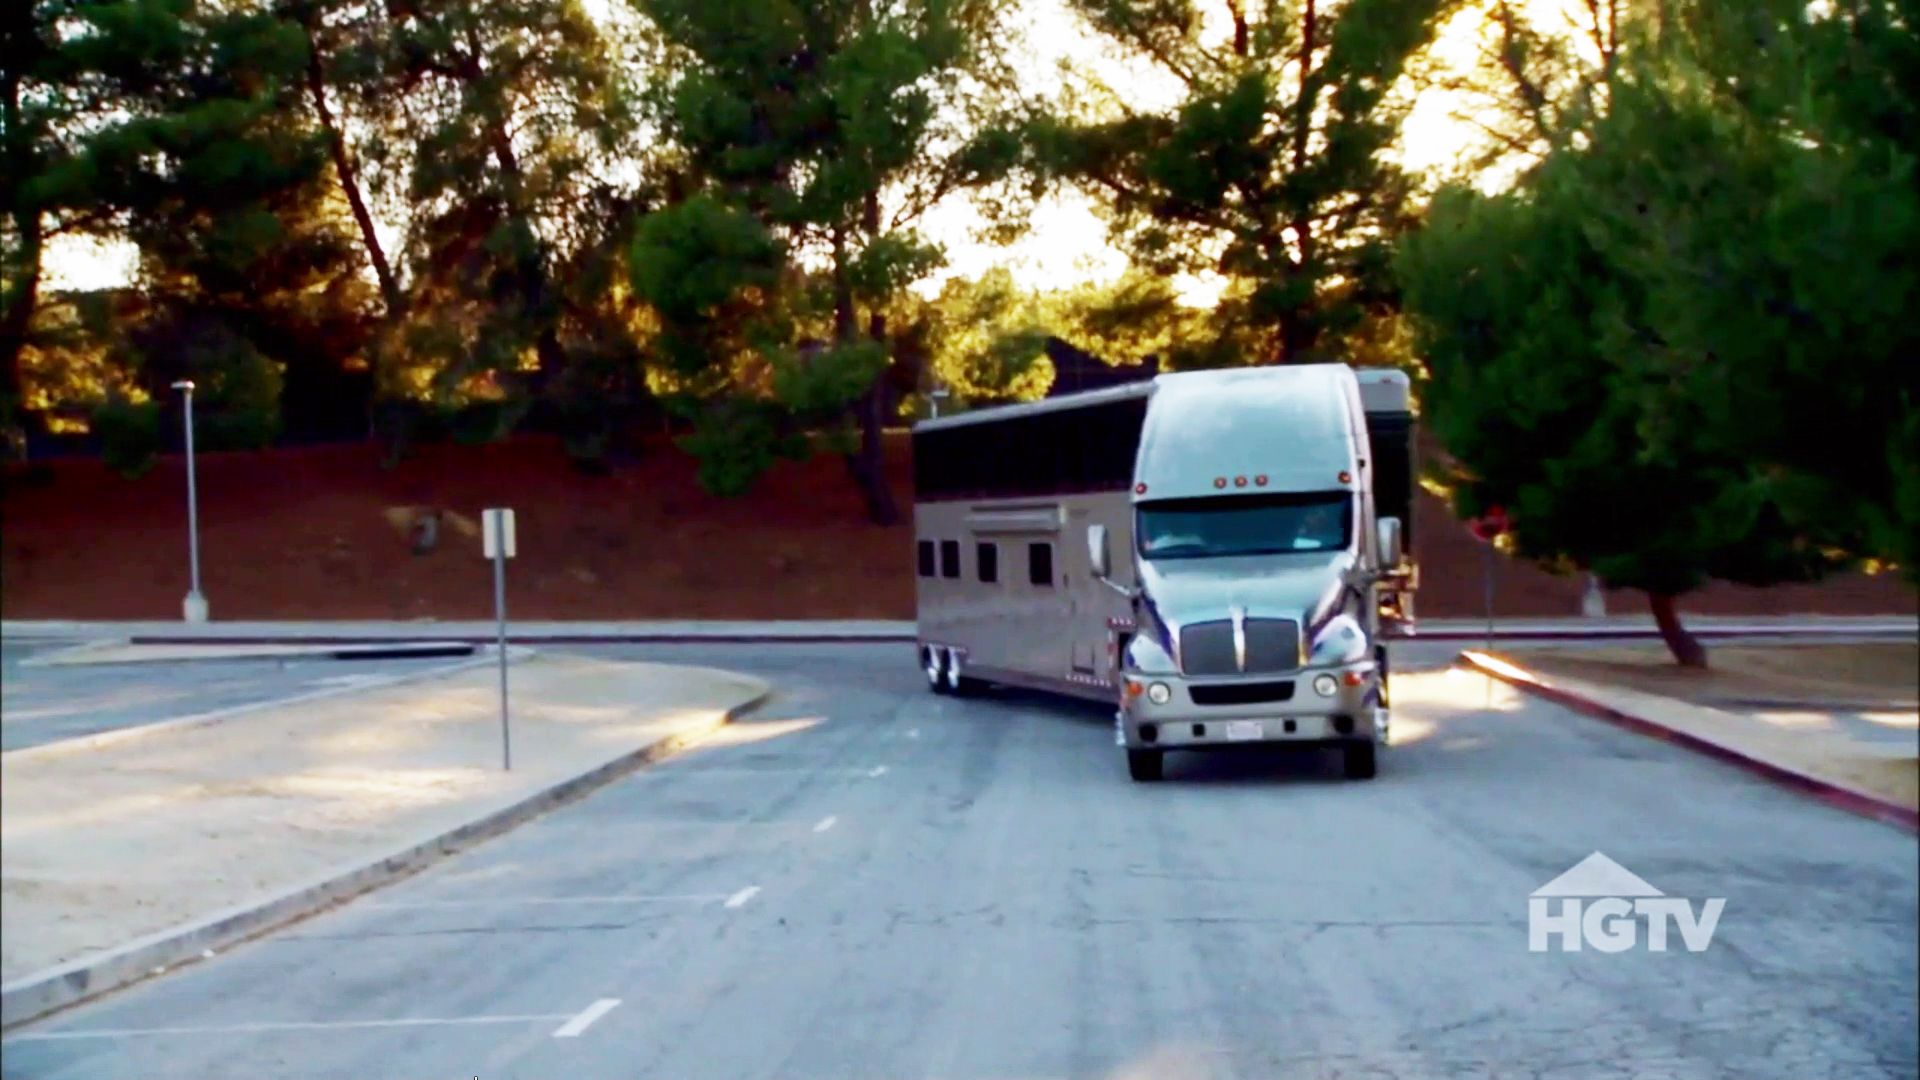 Say Goodbye To Vin Diesel's Motorhome As It Heads To The Next Location